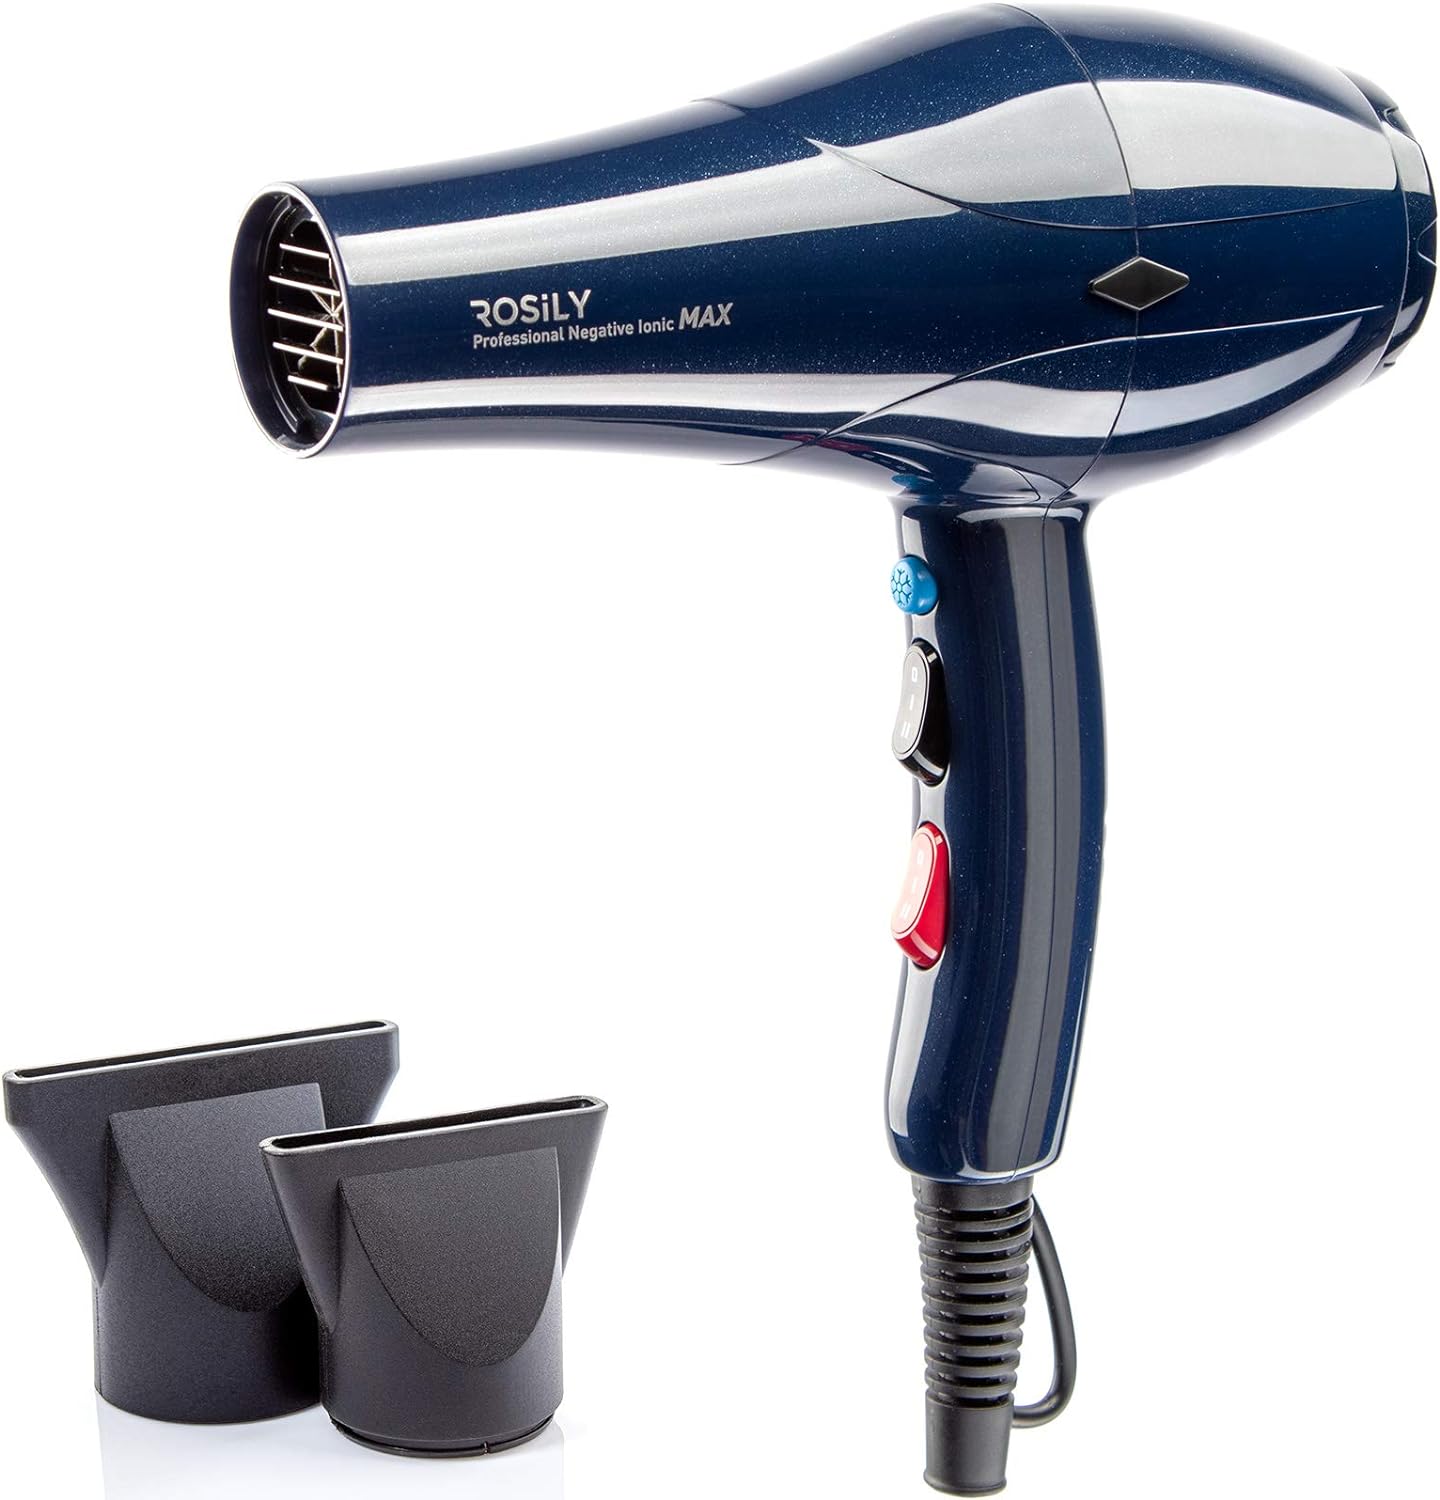 Professional 2200W Ionic Ceramic Hair Dryer | Fast Drying Salon Quality Blow Dryer with Nozzle Attachments for Smooth Shine and Silky Hair | Extra Long Cord and Faster Drying Time